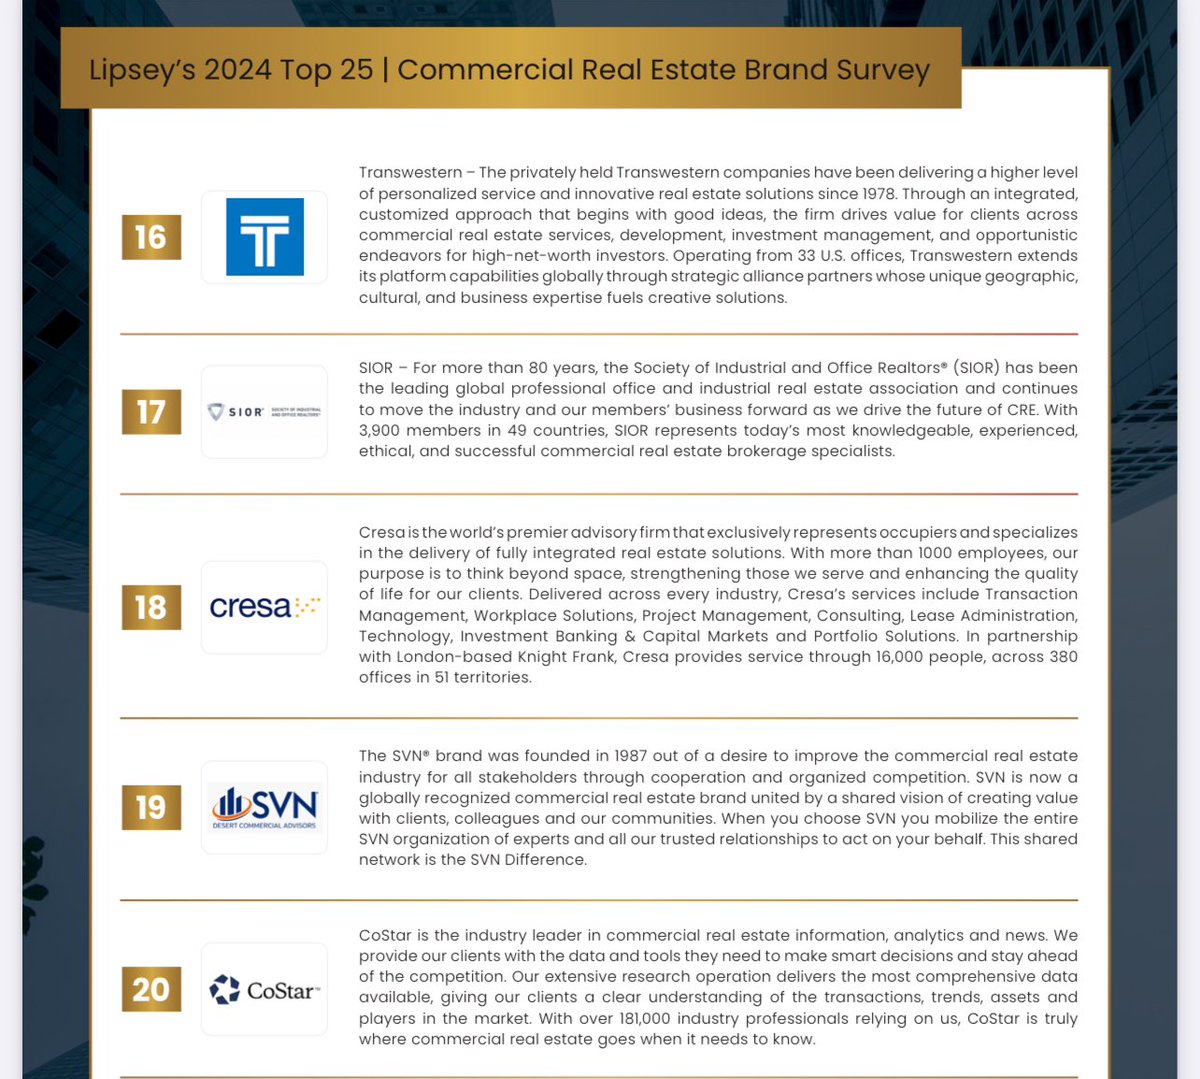 Proud of my @NAIGlobal team for landing at Number 6 on @TheLipseyCo’s 2024 #CRE brand survey.
-JP